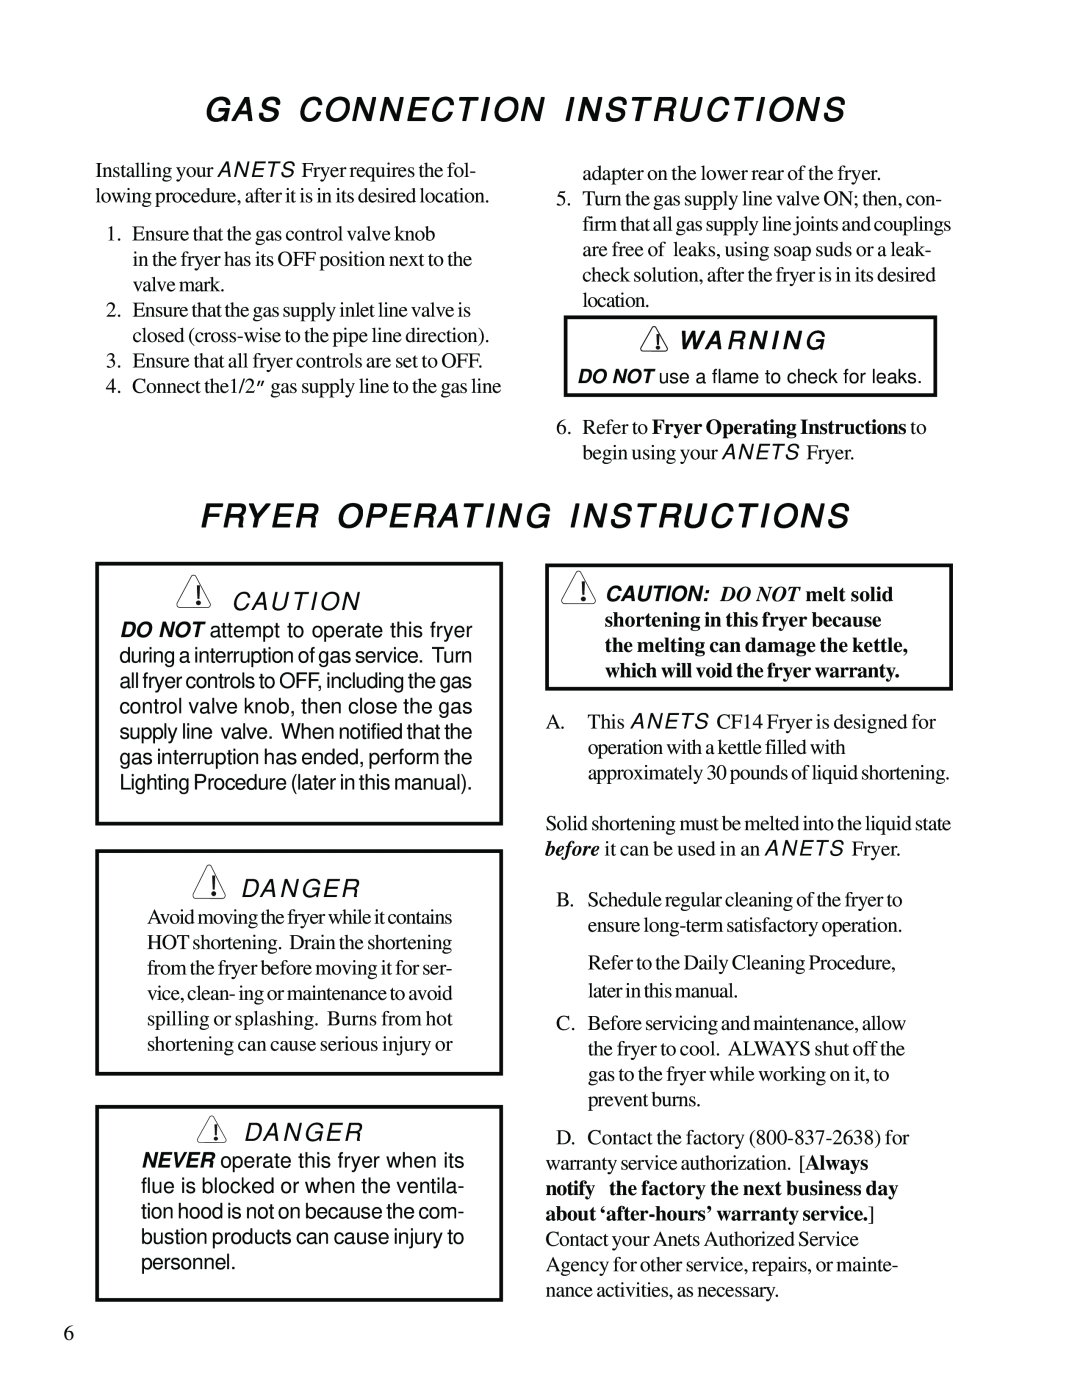 Anetsberger Brothers CF14 Gas Connection Instructions, Fryer Operating Instructions, Danger, CAUTION DO NOT melt solid 